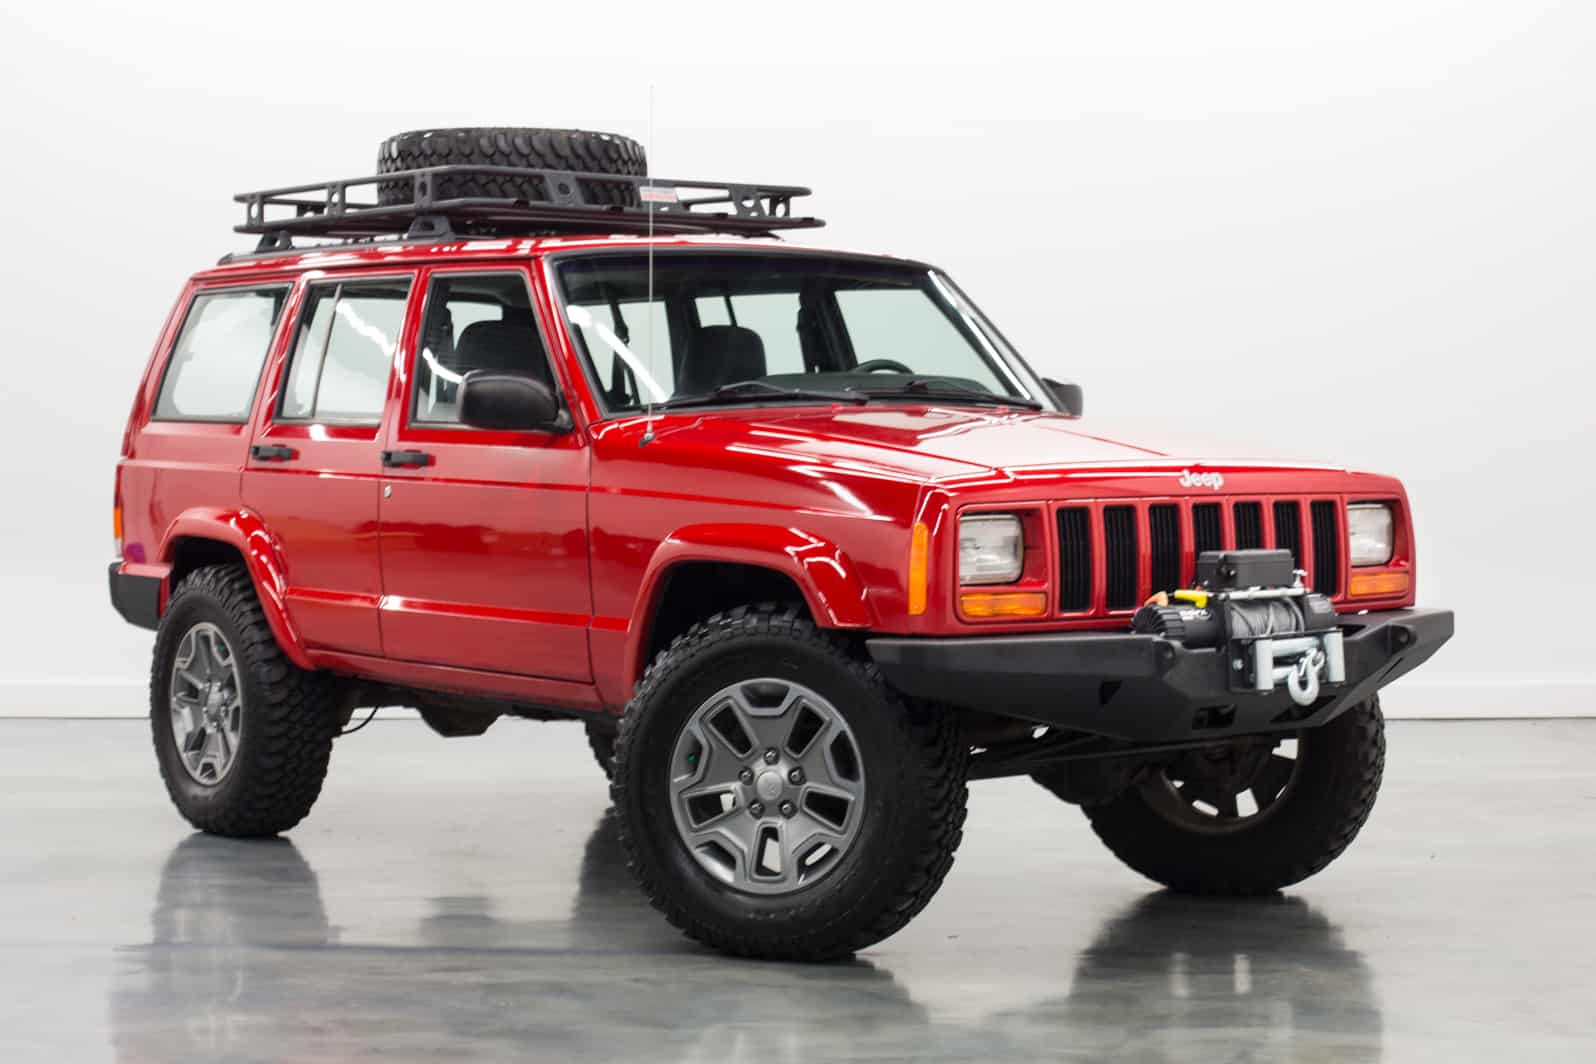 What is the Cheapest Off Road Vehicle?